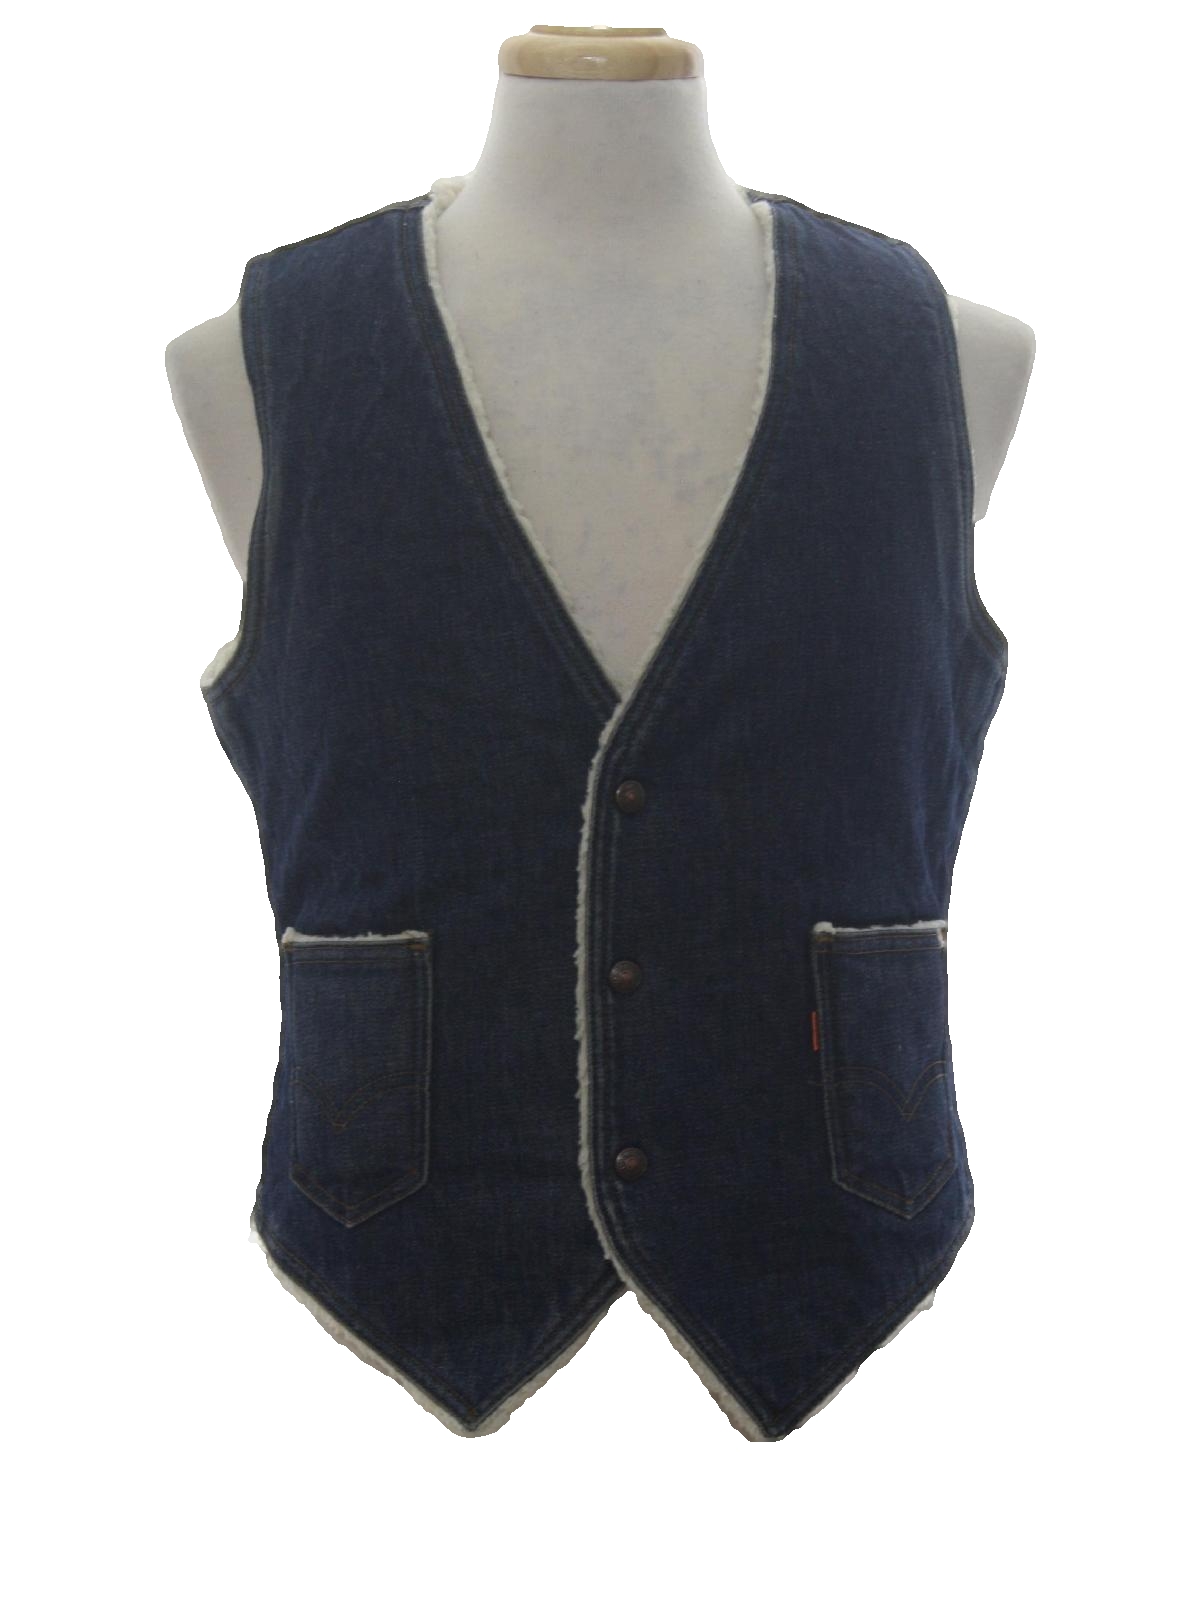 Sixties Vintage Vest: Late 60s or Early 70s -Levis- Mens dark blue ...